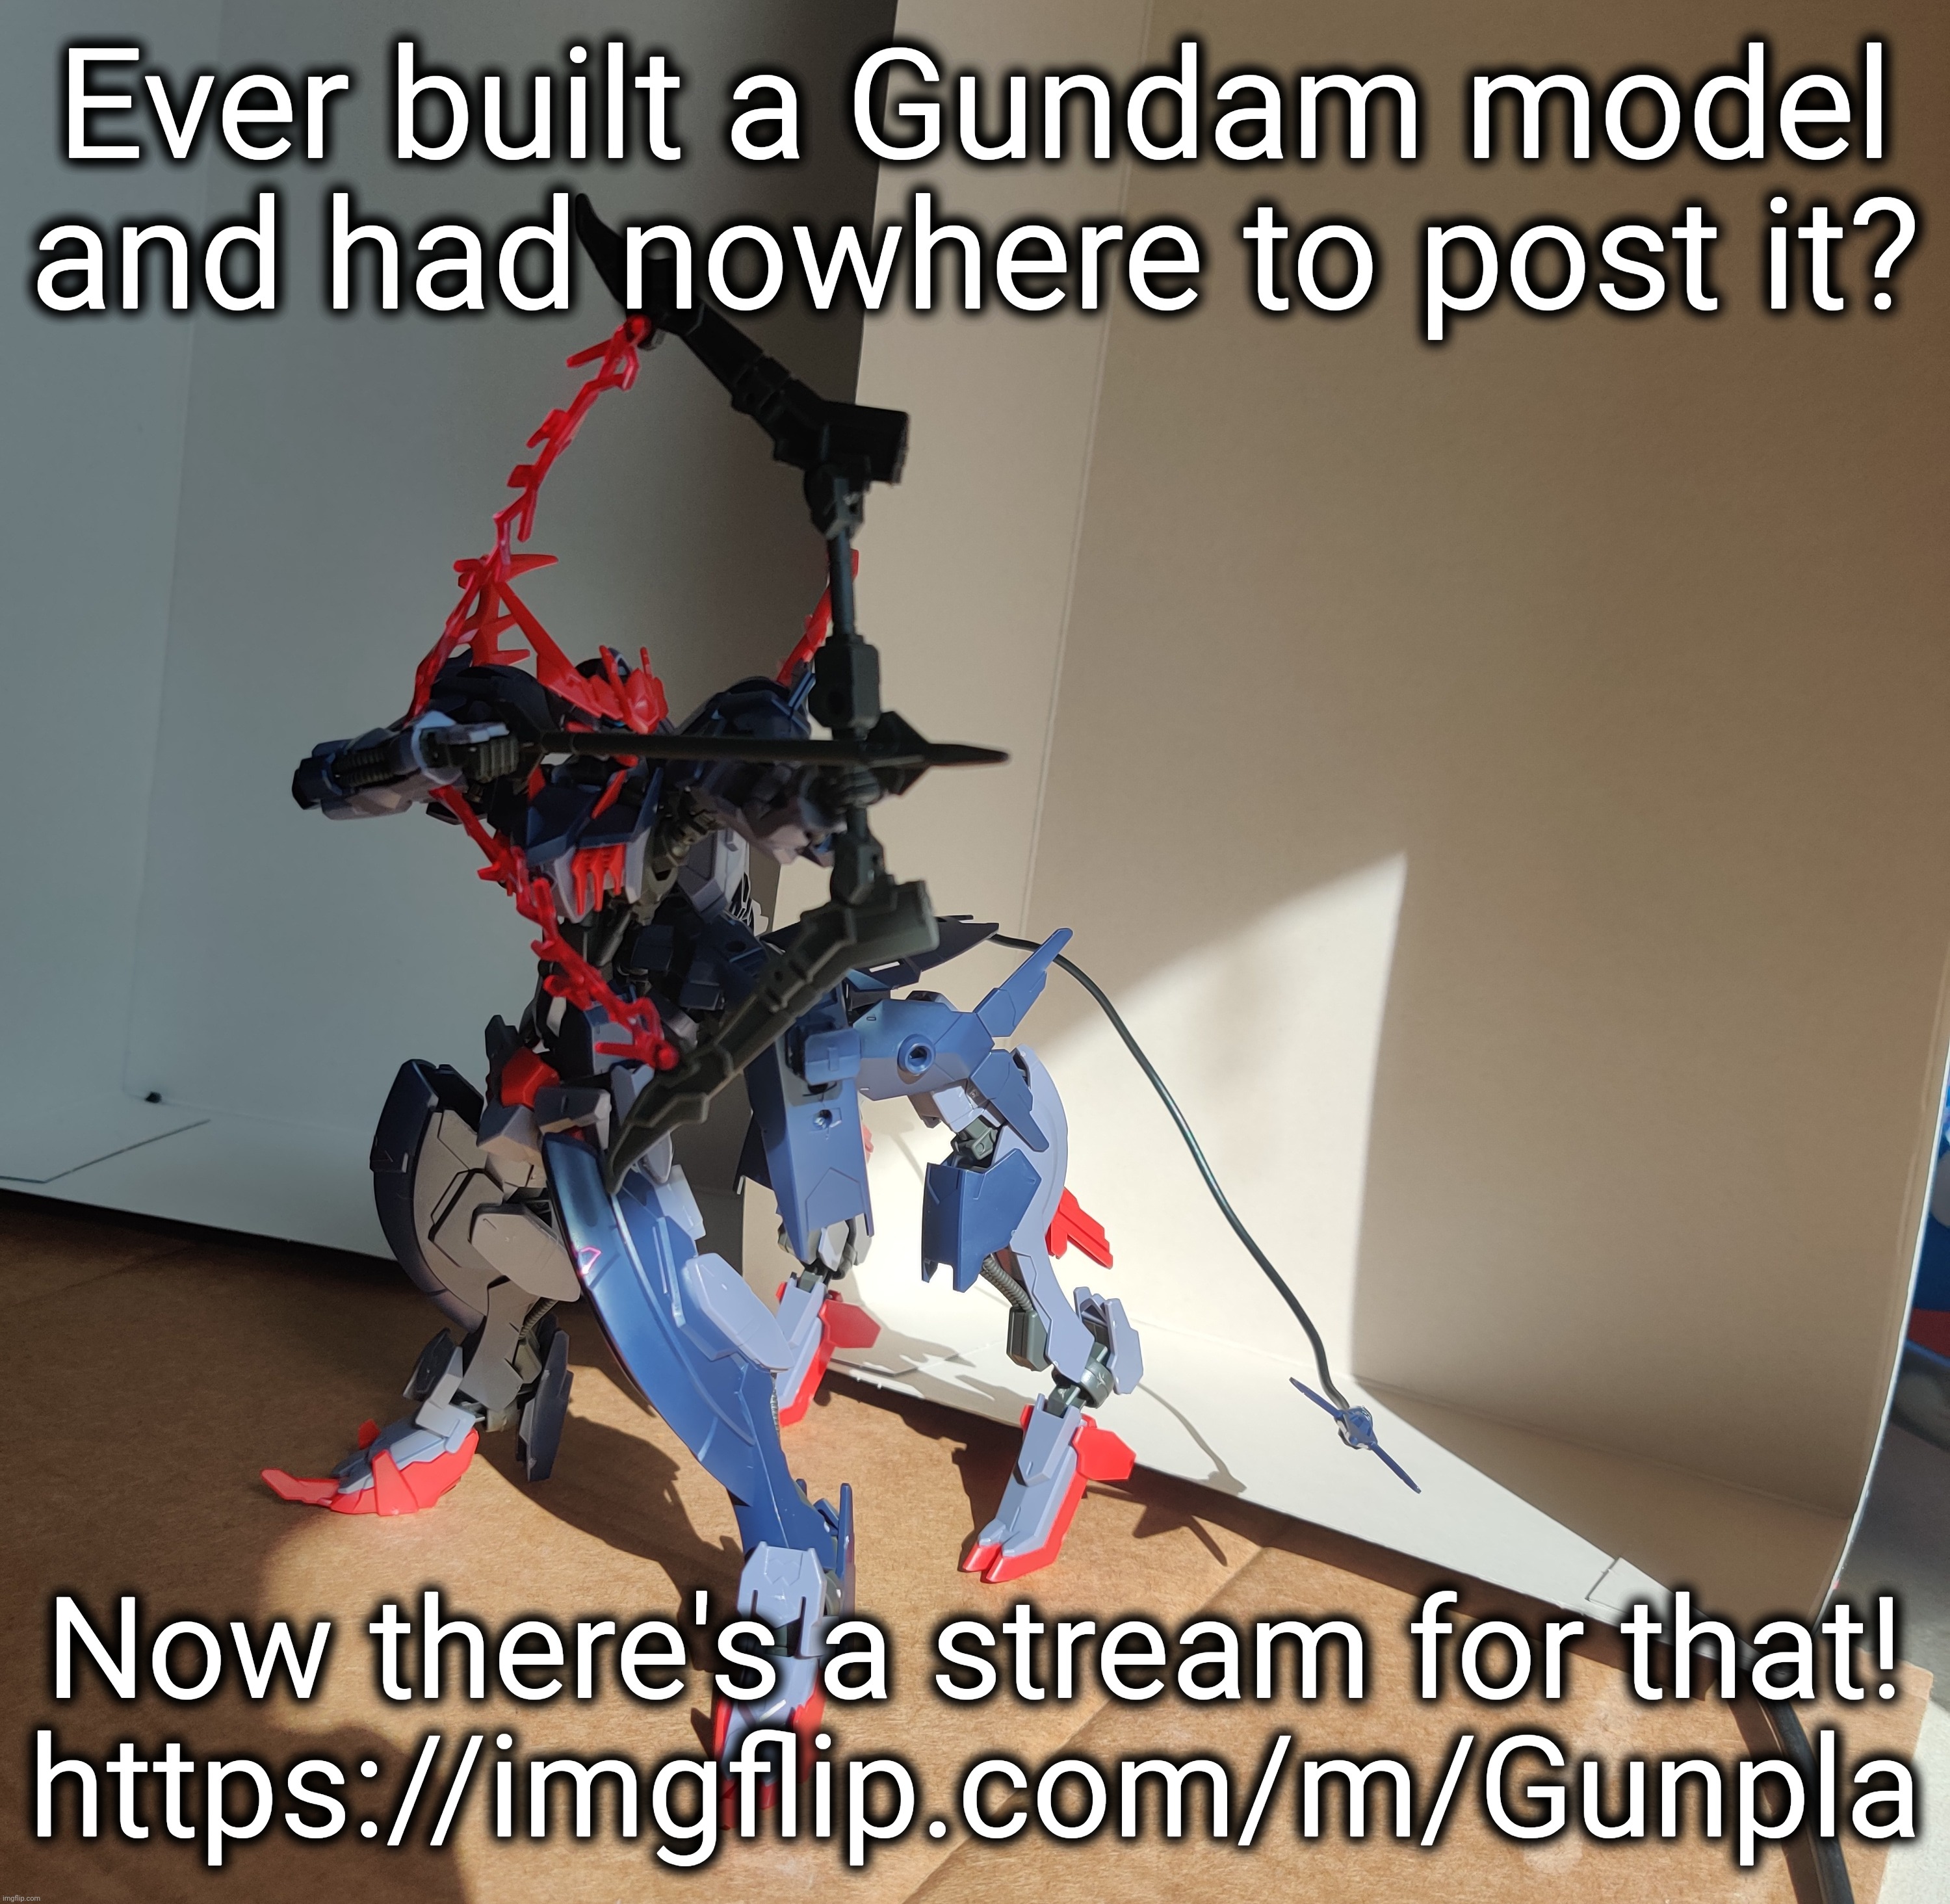 Feel free to post Gundam reviews or anything related to the hobby. Link in comments | Ever built a Gundam model and had nowhere to post it? Now there's a stream for that!
https://imgflip.com/m/Gunpla | made w/ Imgflip meme maker